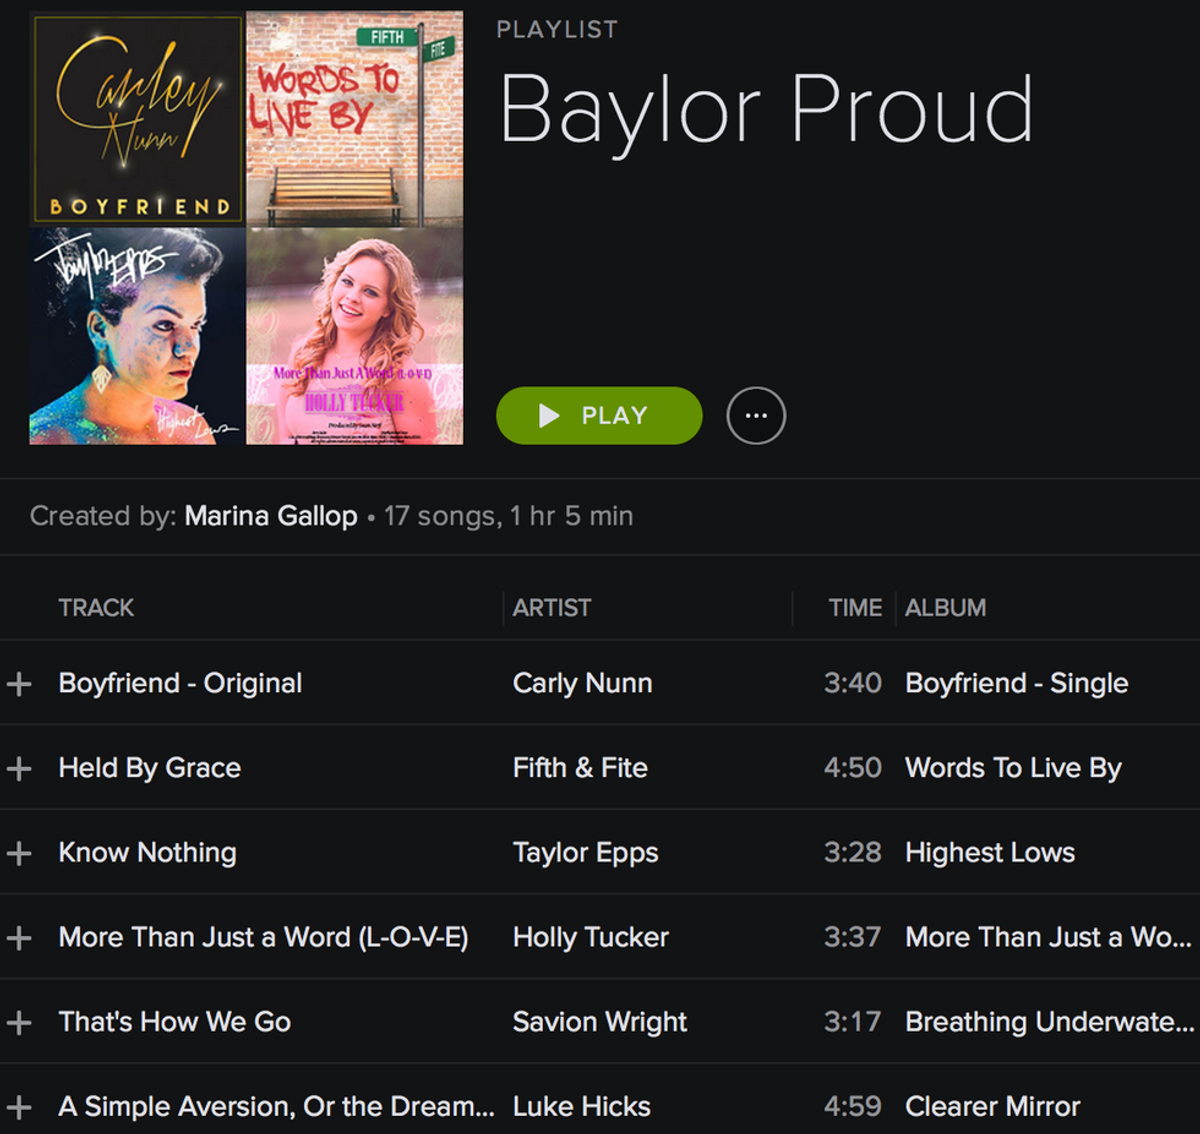 A Playlist for the Baylor Proud